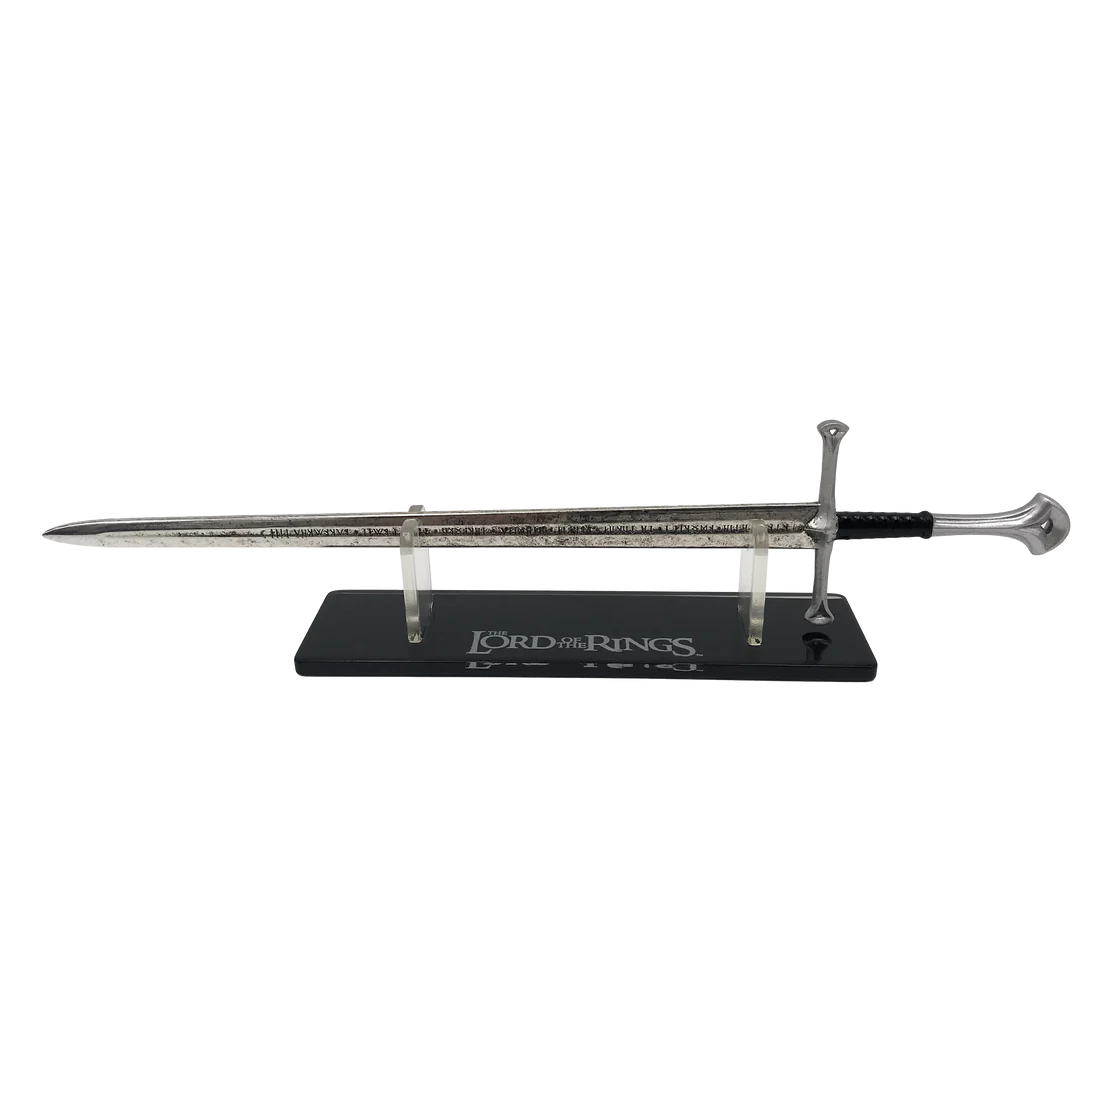 Lord of the Rings Anduril Scaled Replica